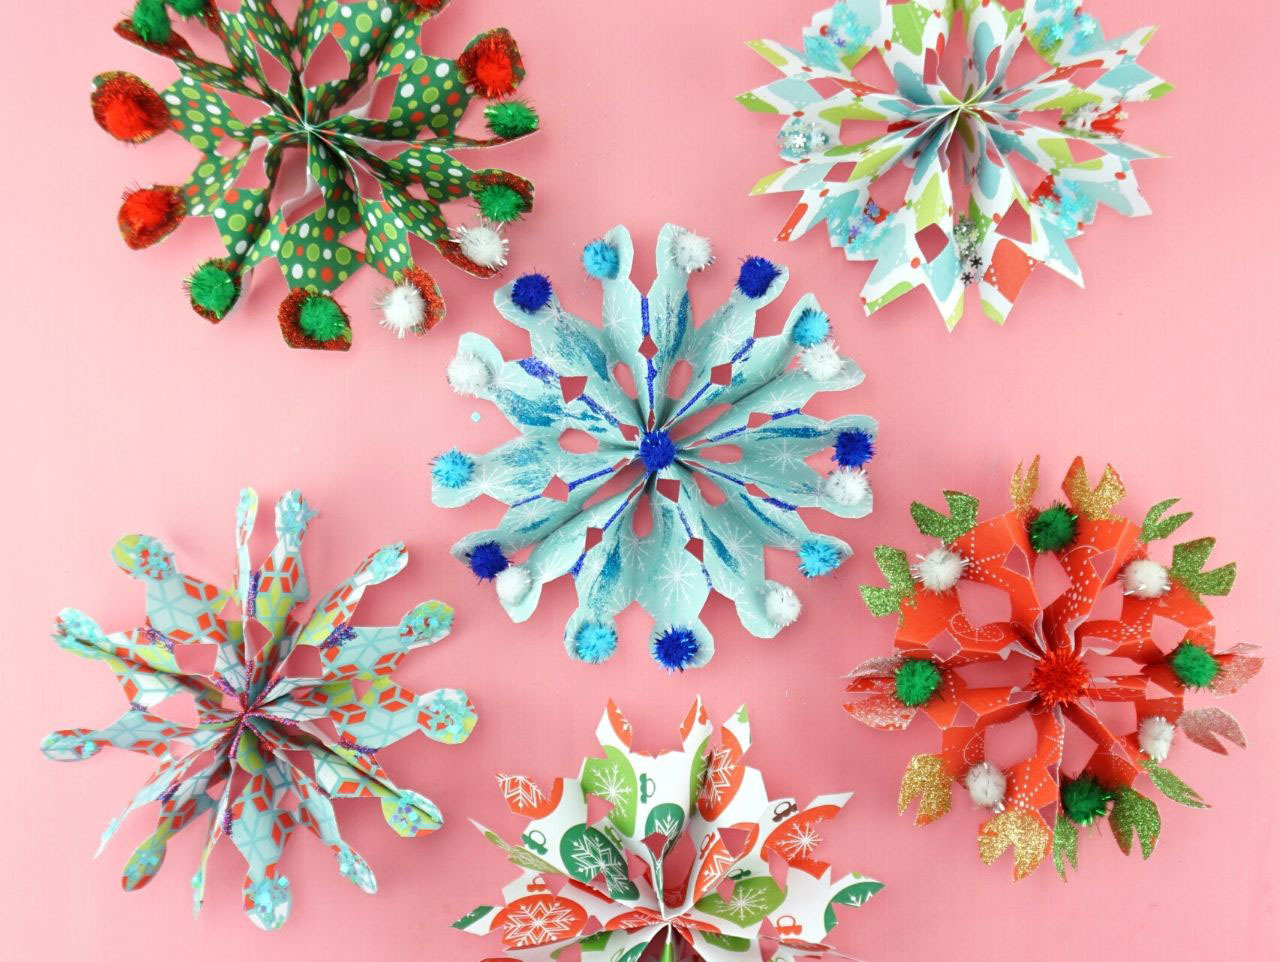 16 Easy Snowflake Crafts for Kids - Snowflake Arts and Crafts Ideas